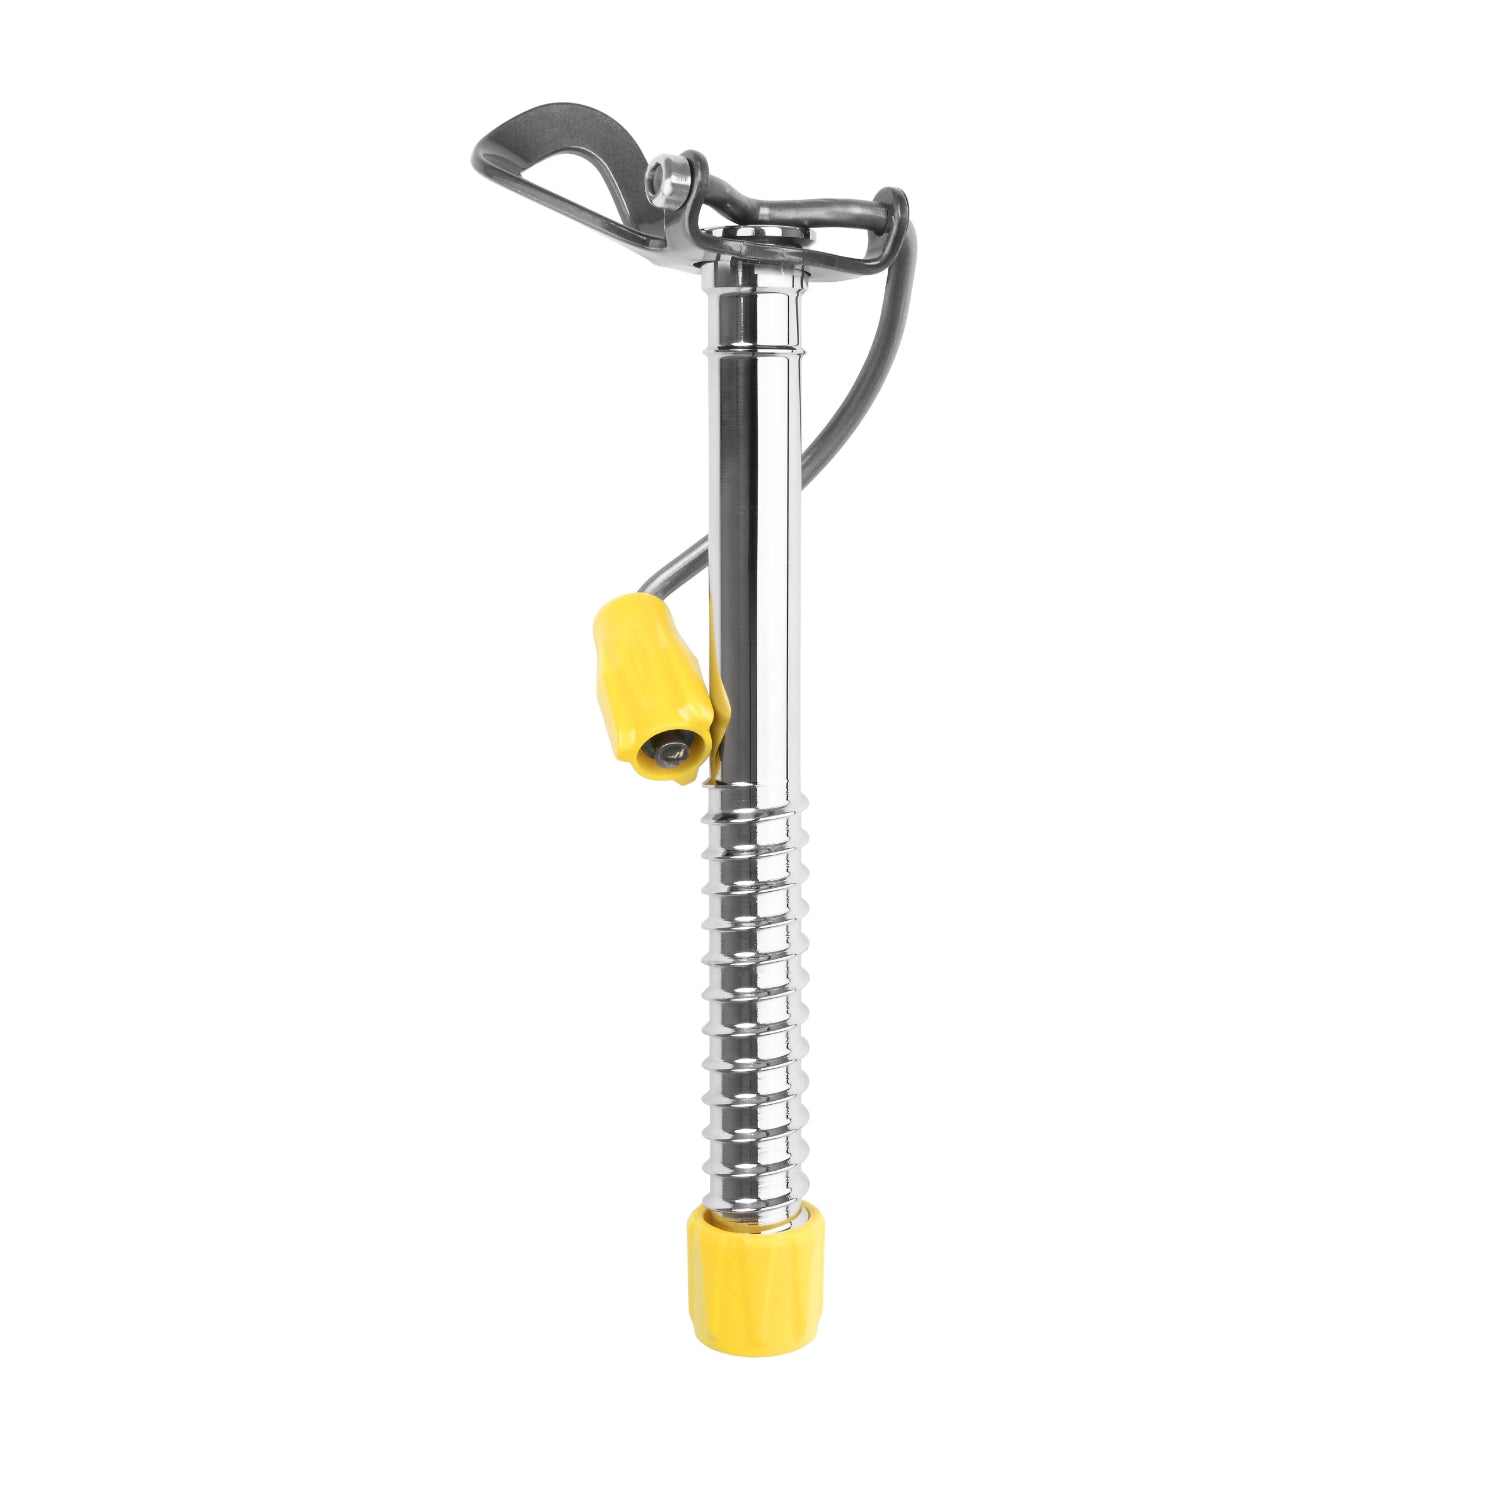 Grivel 360 Ice Screw Long, with silver shaft and yellow tag